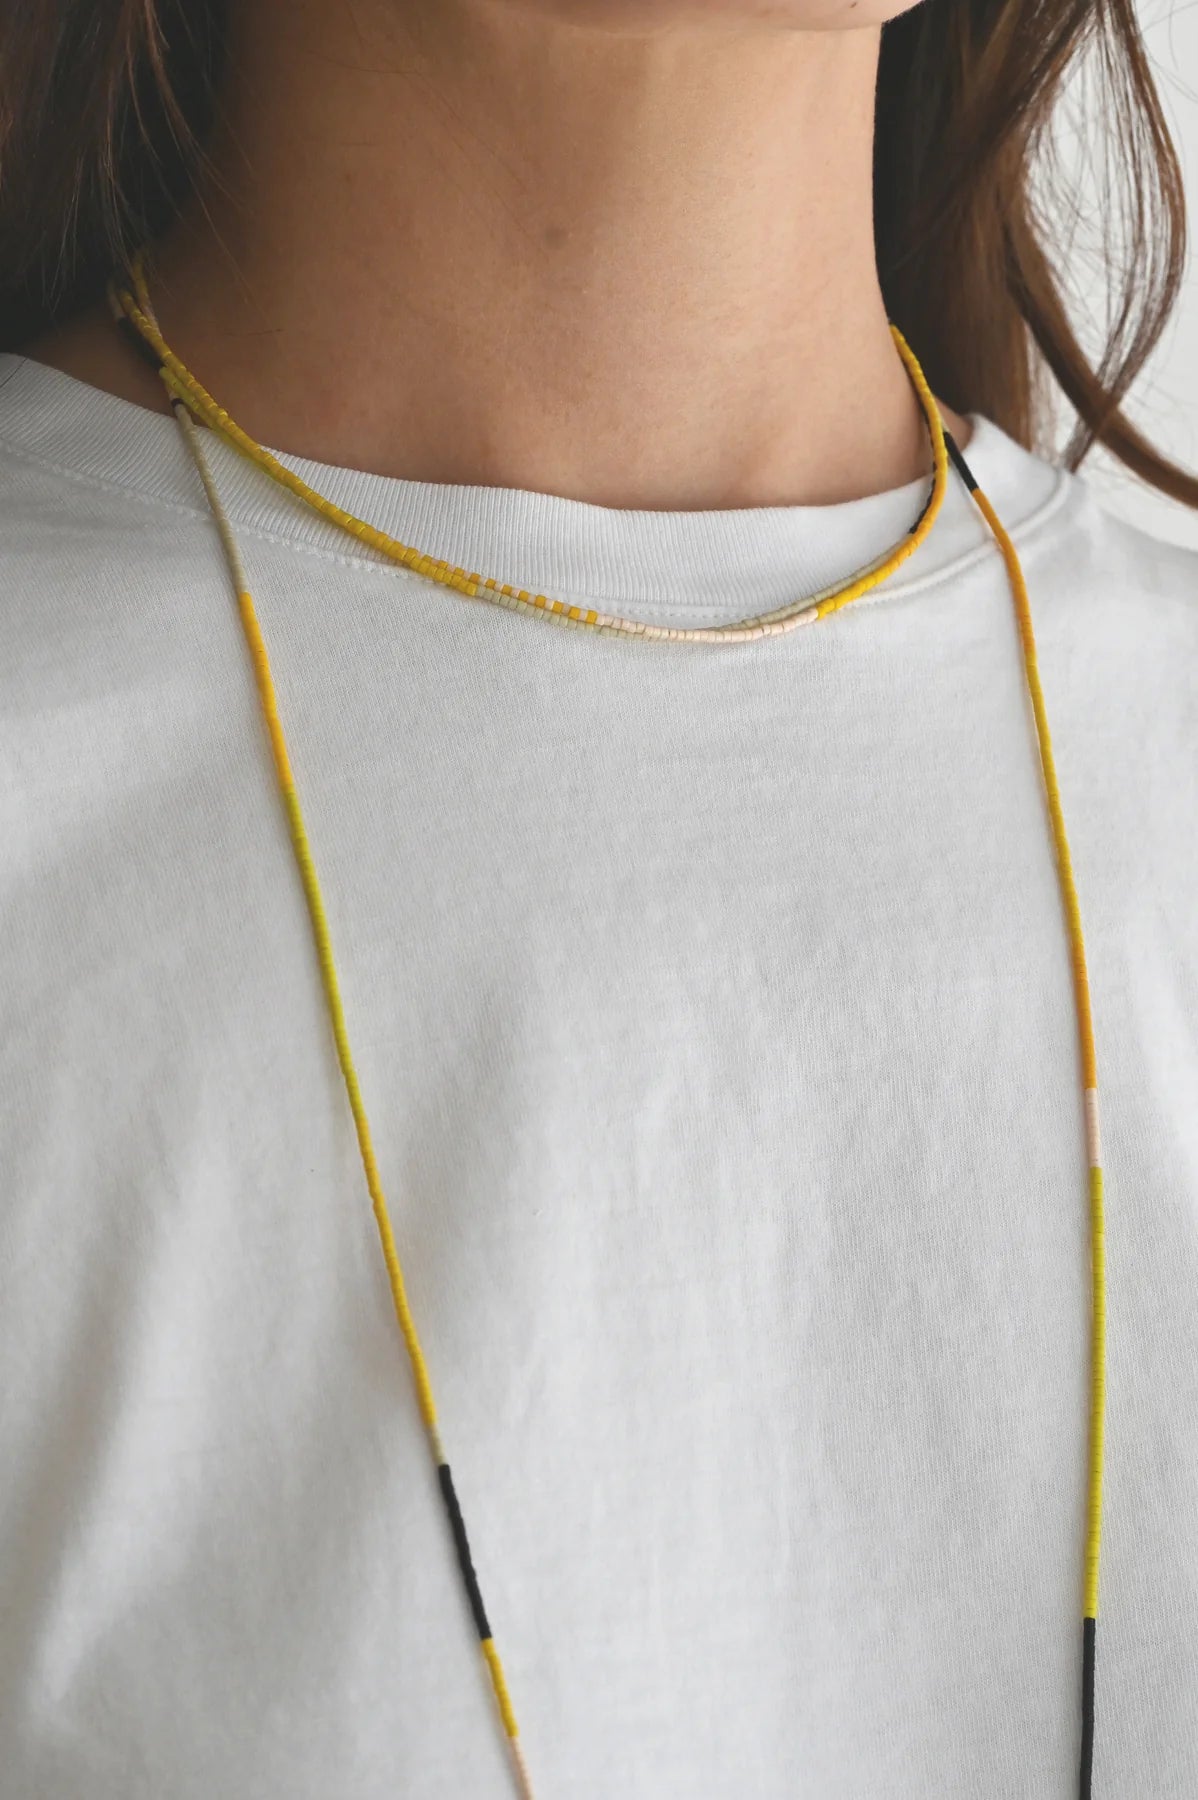 A YELLOW SUN NECKLACE